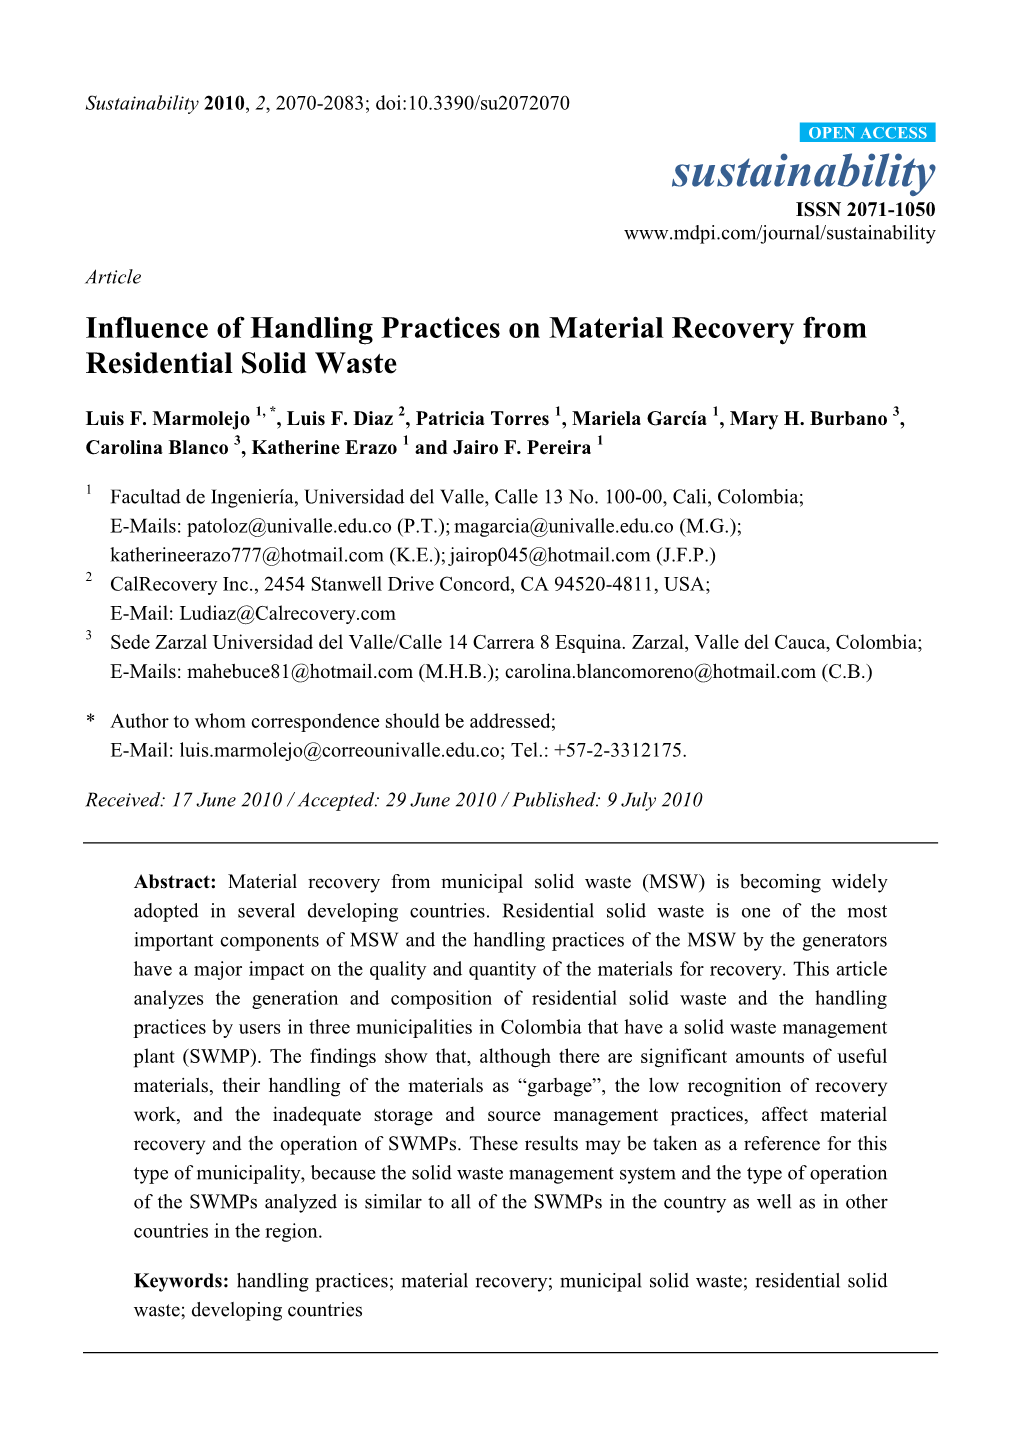 Influence of Handling Practices on Material Recovery from Residential Solid Waste